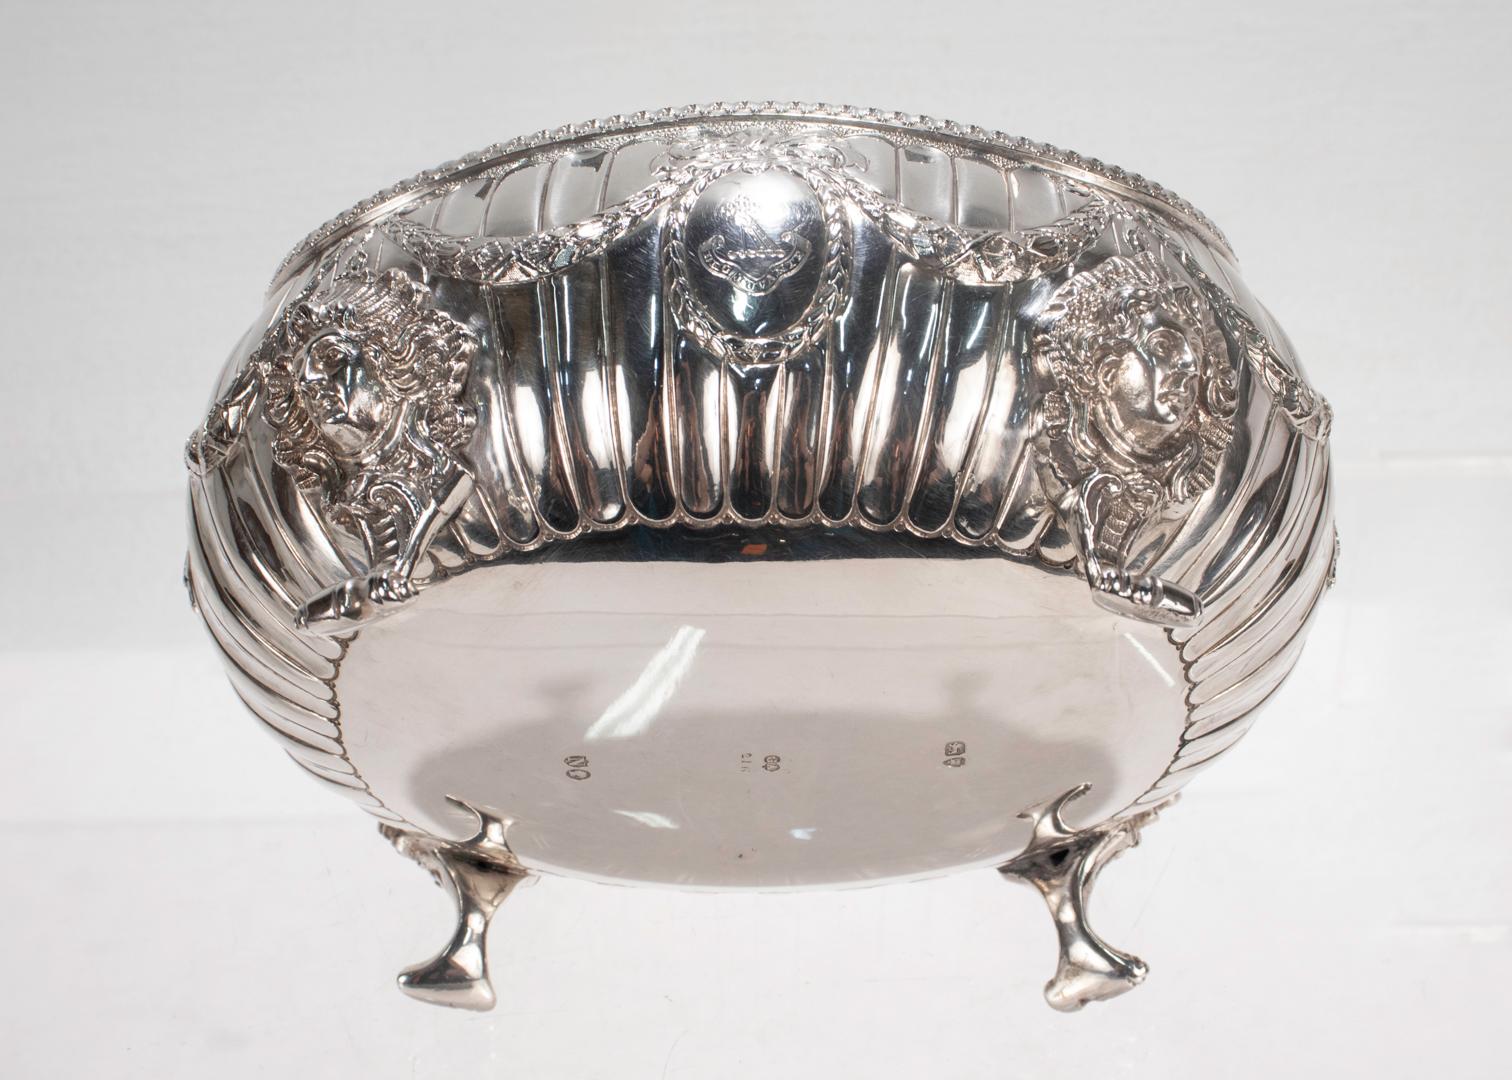 Antique Victorian English Sterling Silver Footed Bowl by George Aldwinckle For Sale 7